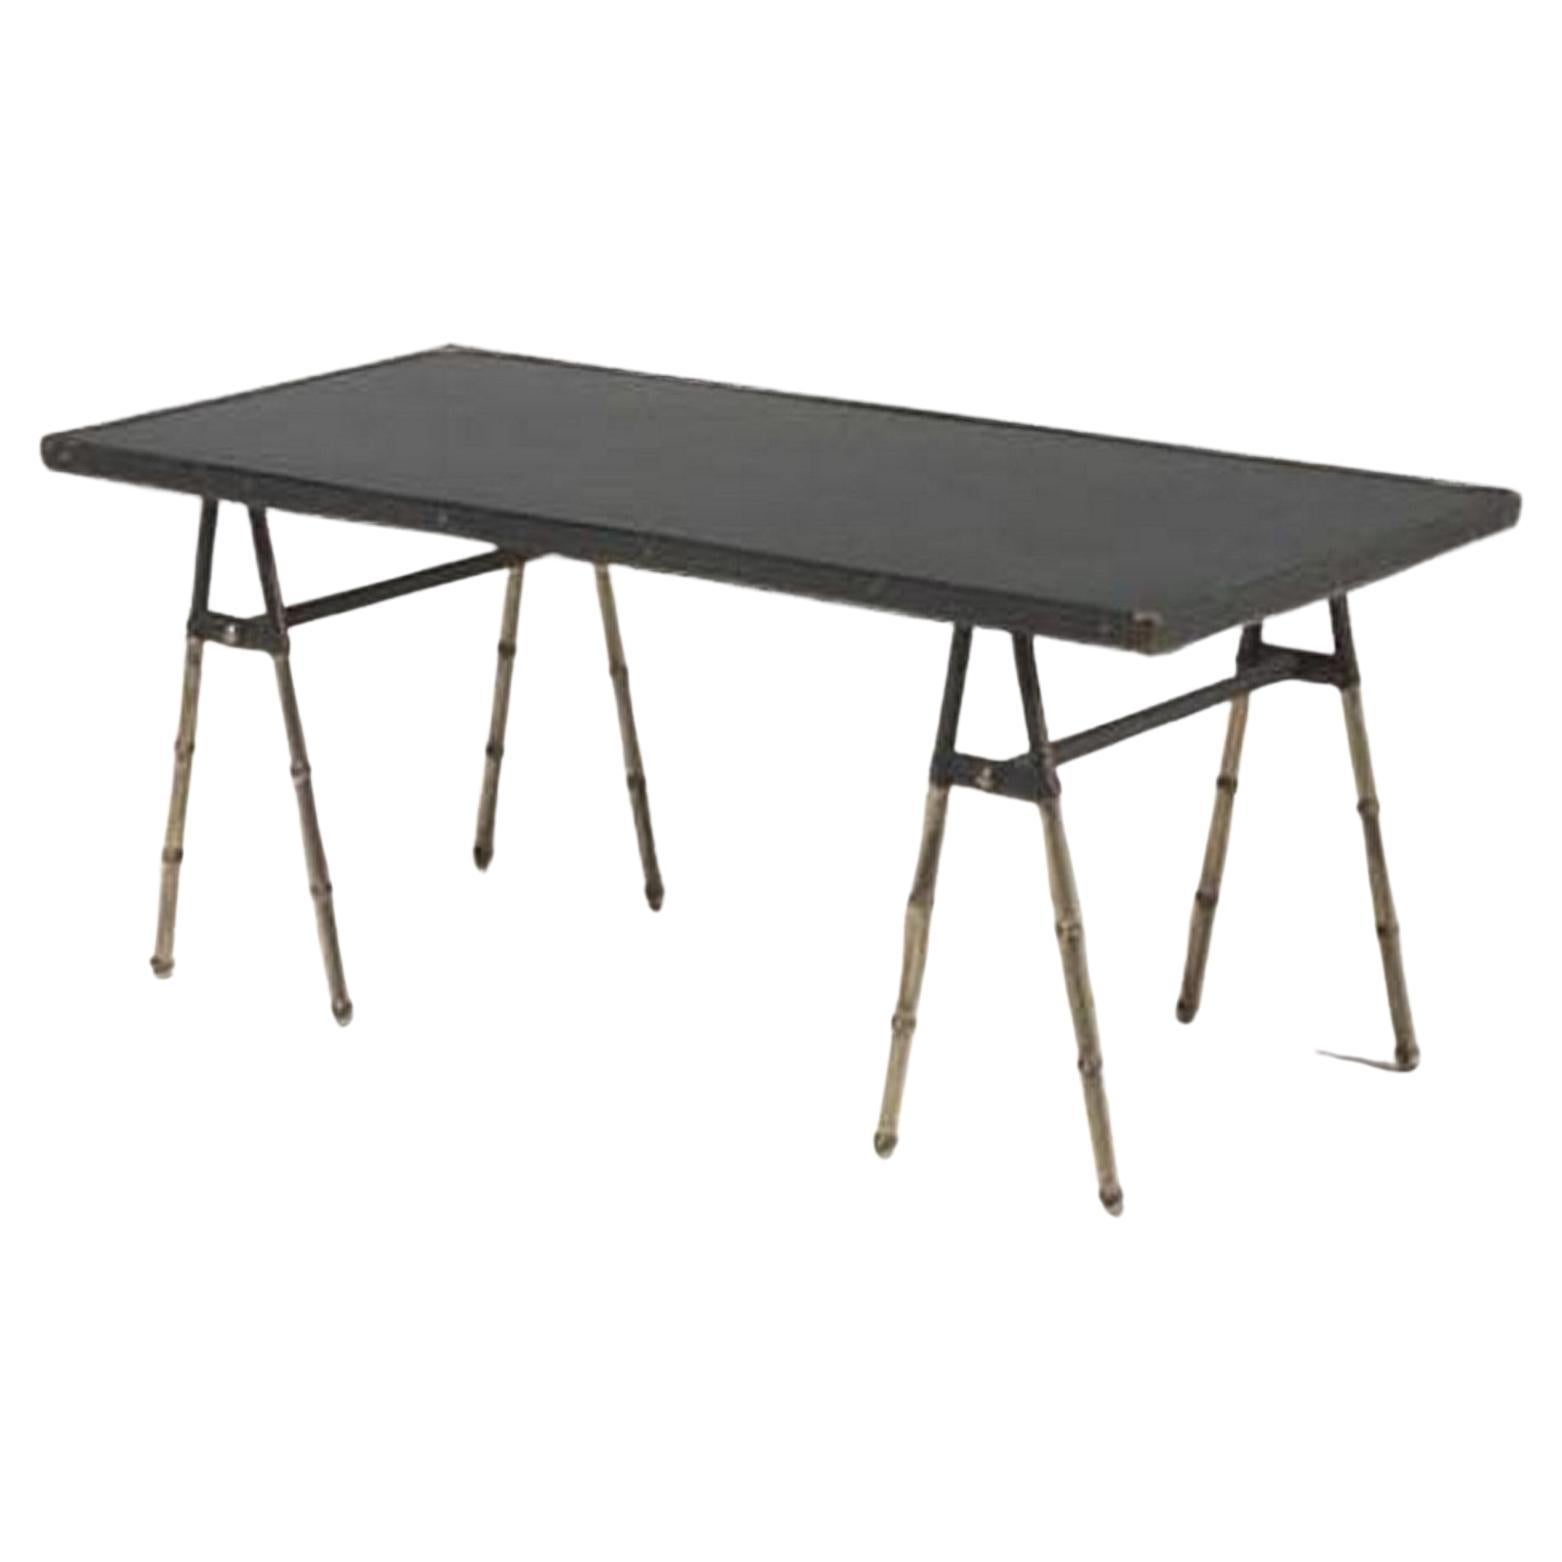 Mid-Century Modern Stitched Leather and Brass Coffee Table by Jacques Adnet